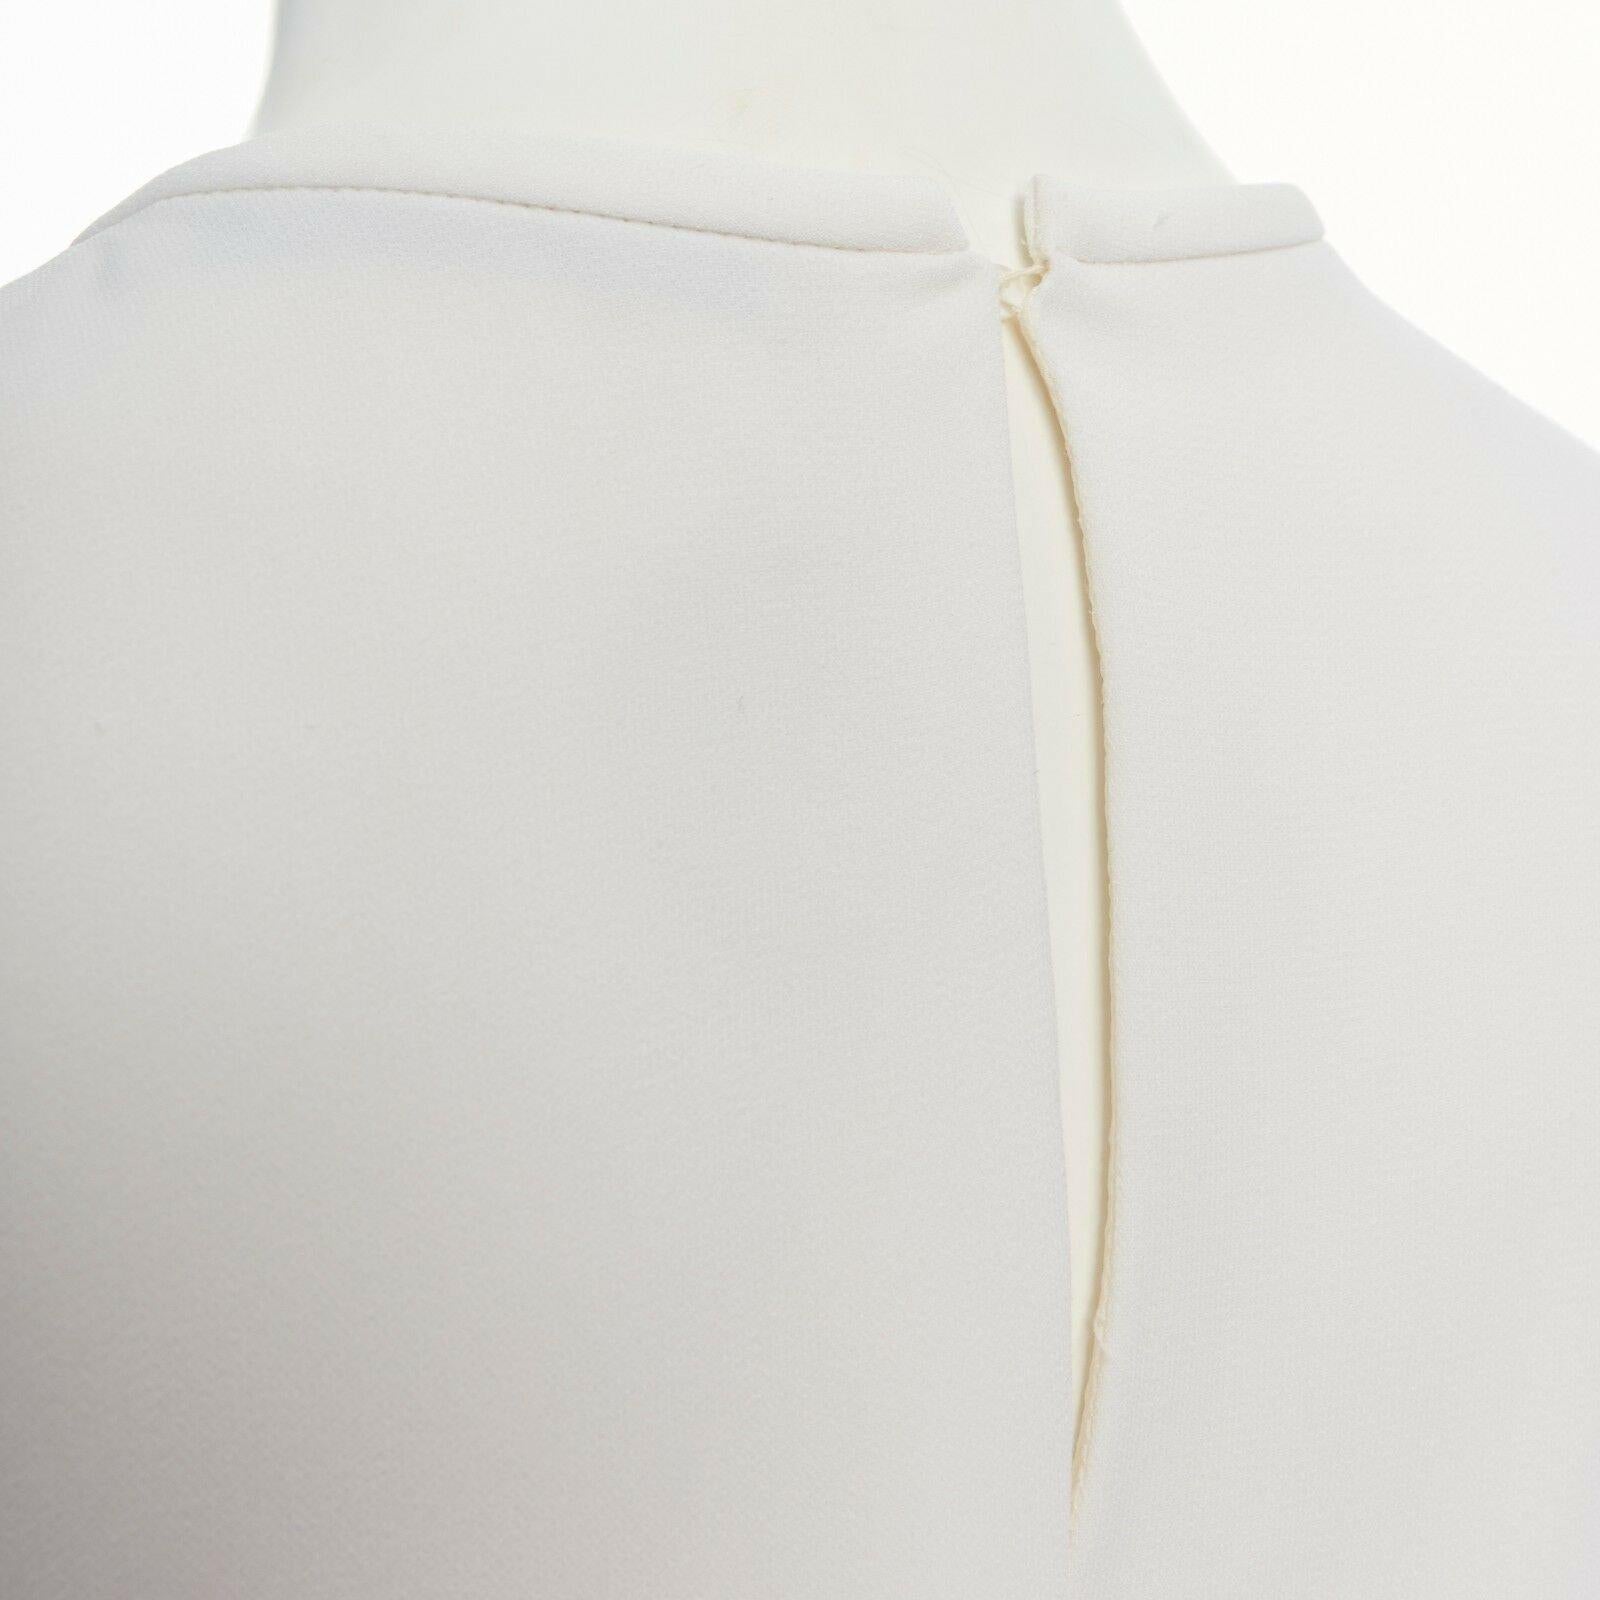 BALENCIAGA 2012 white crepe rounded sleeves blouse top FR36 S 3